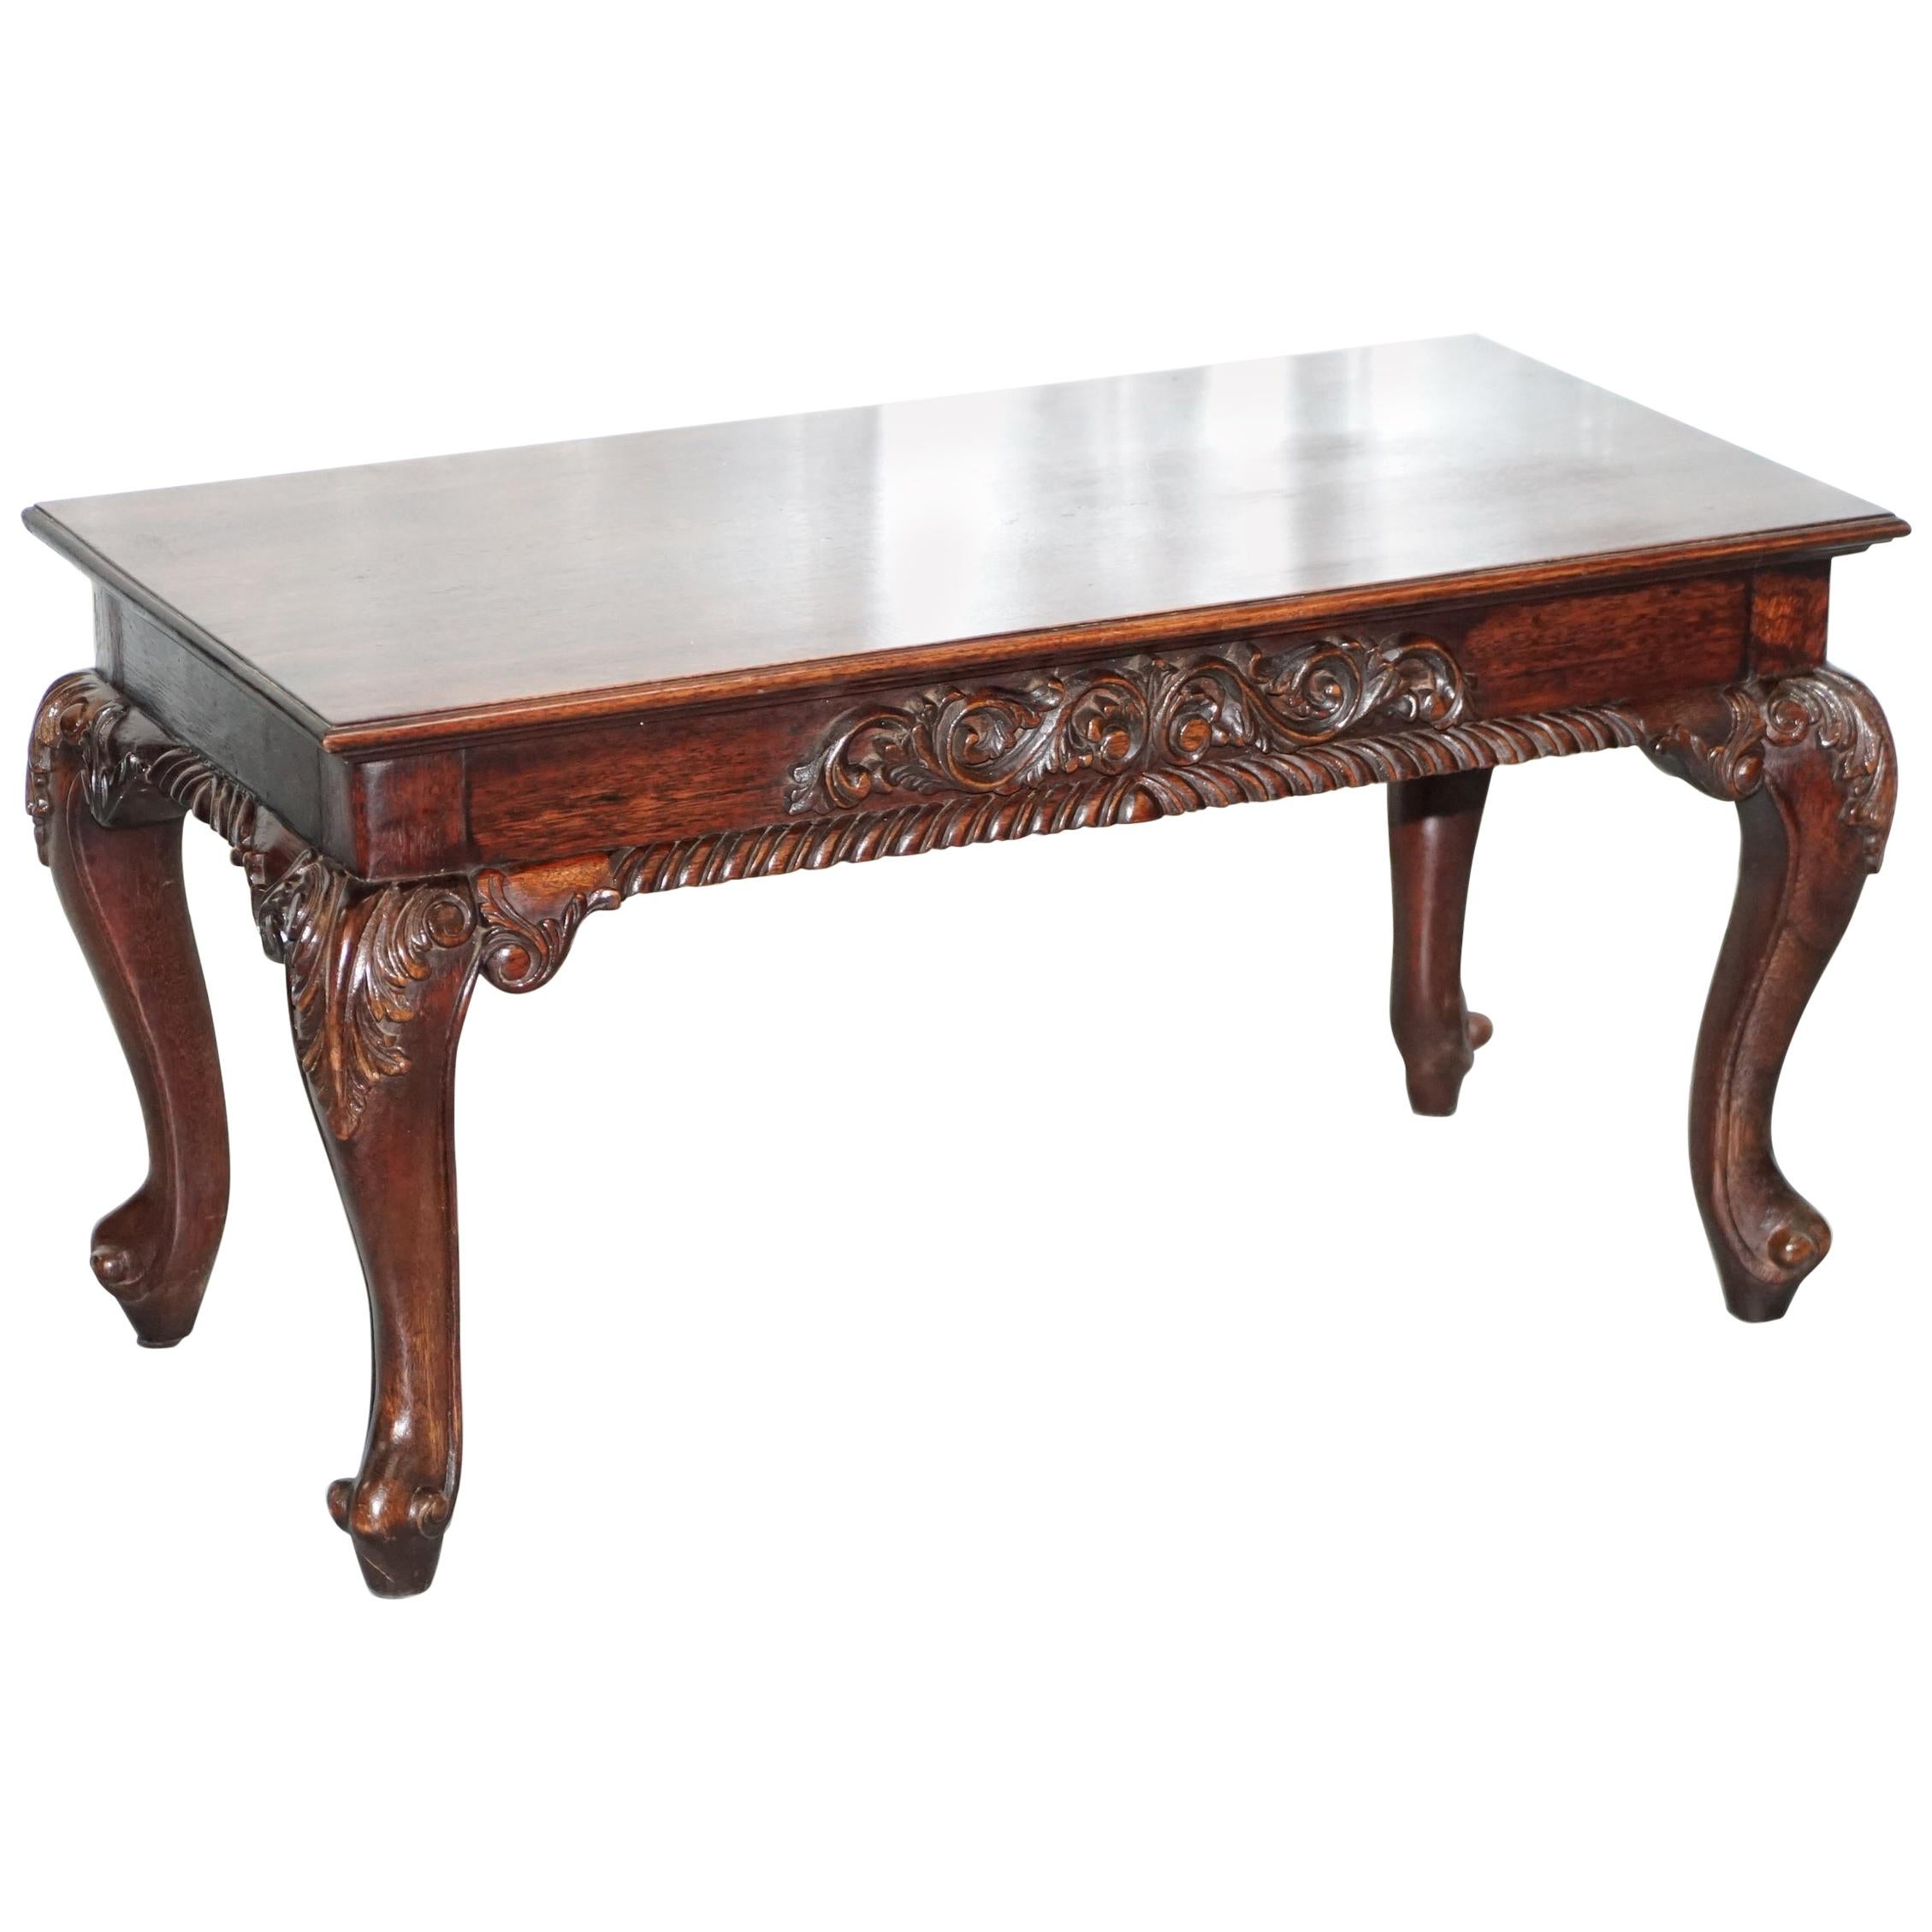 Nice Small Vintage Carved Hardwood Coffee Table with Irish Acanthus Leaf Details